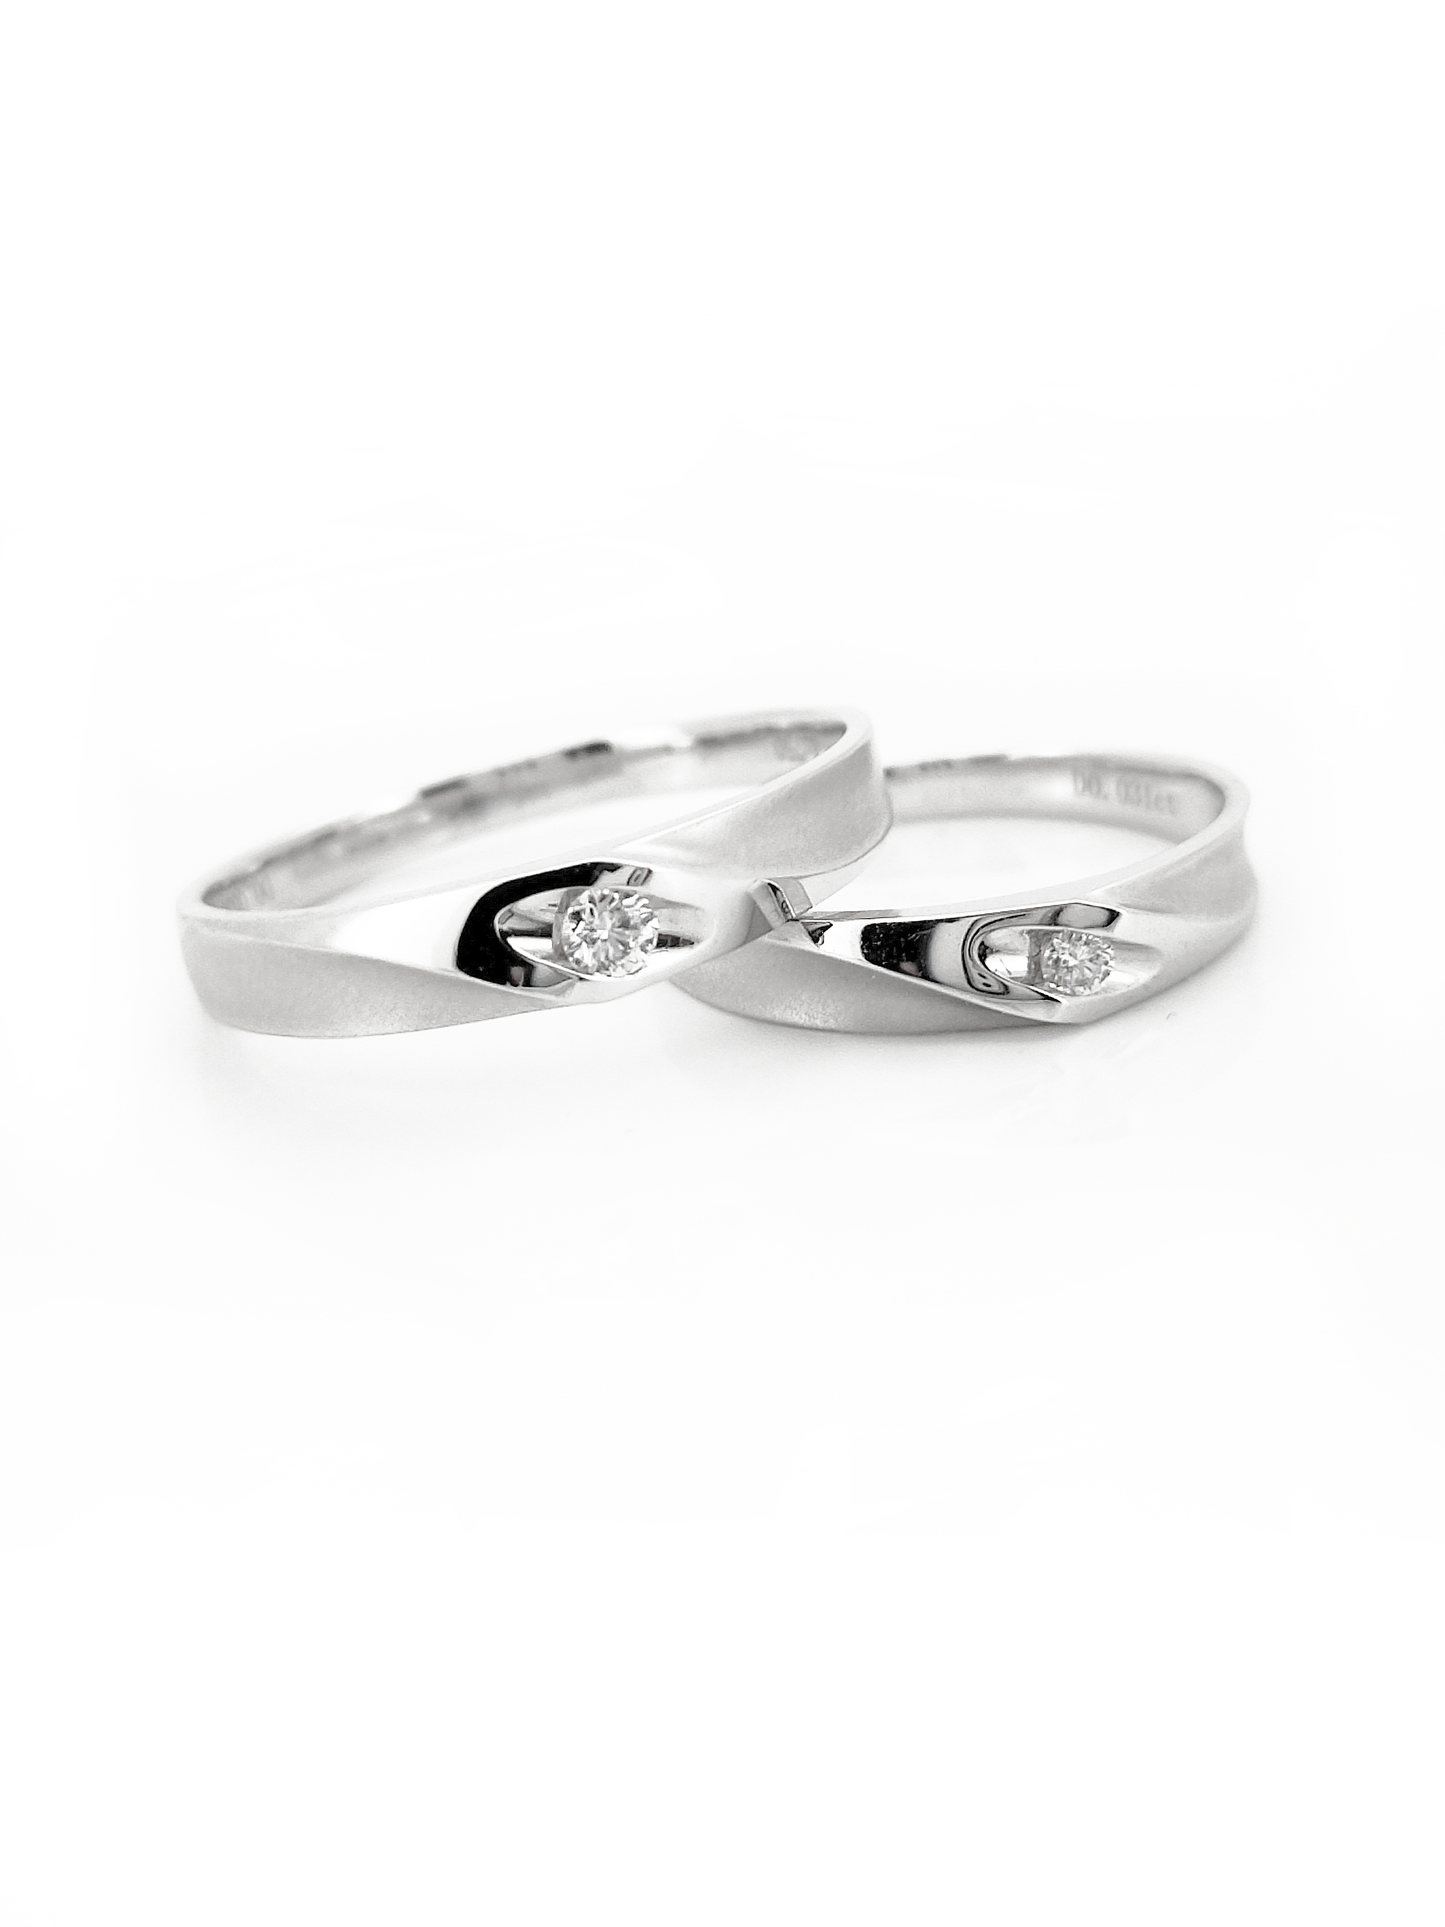 White Gold Ring With Diamond 0.031CT & 0.063CT